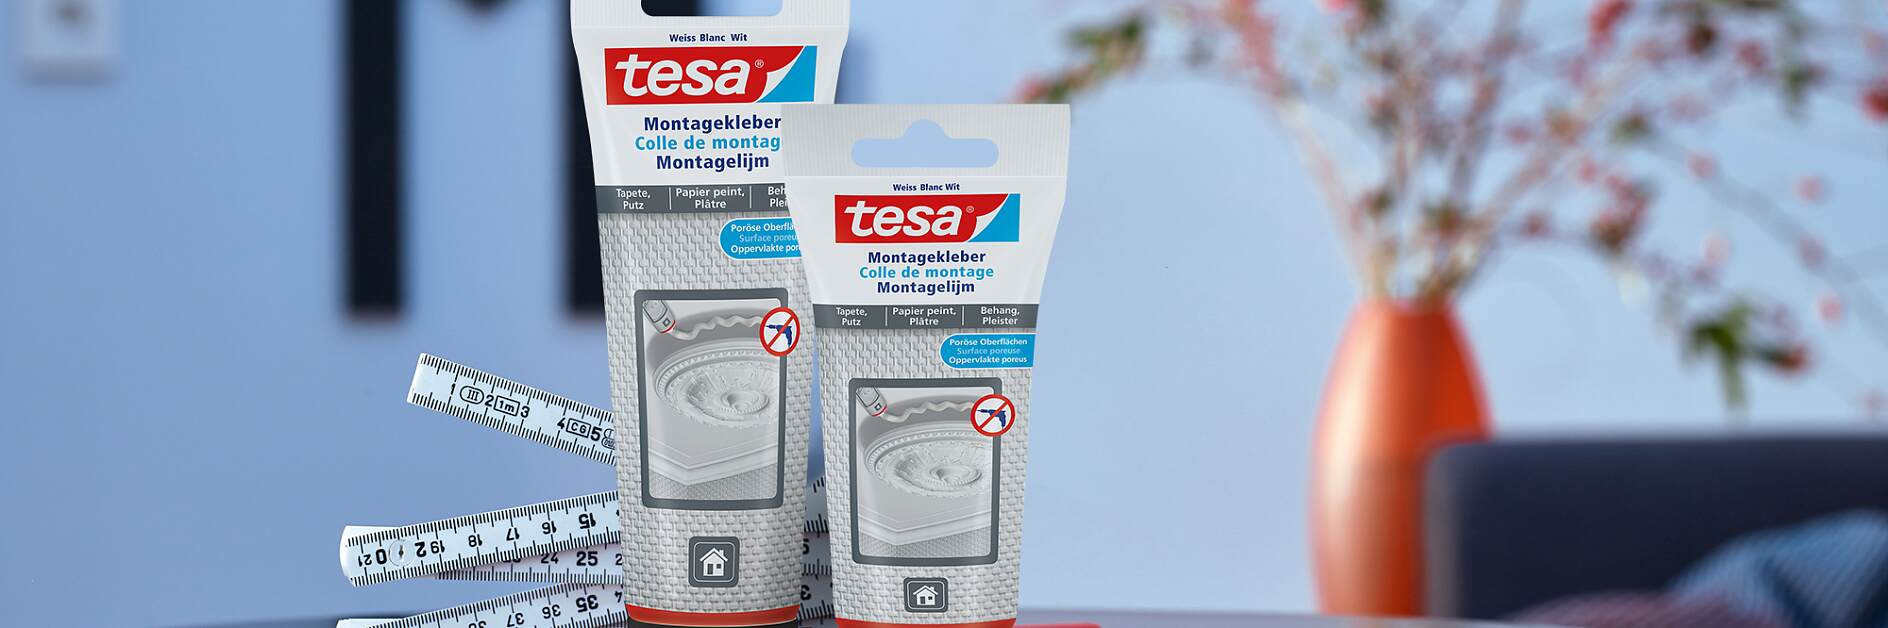 How to use tesa® Mounting Glue for Wallpaper & Plaster 10kg/cm2.